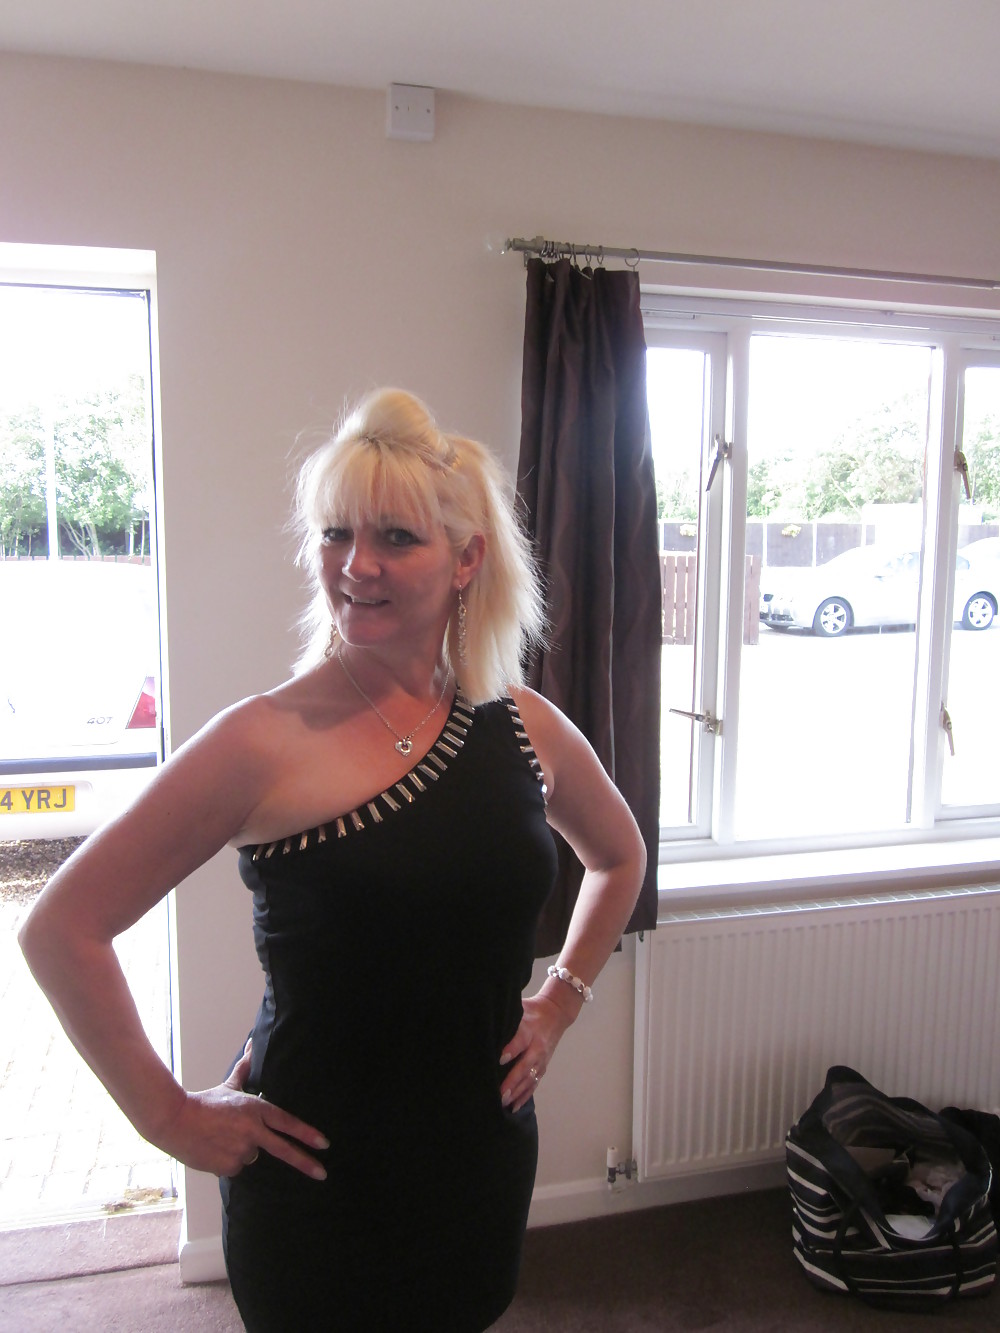 Lincs milf flashing, want to know when next shooting planned
 #34312013